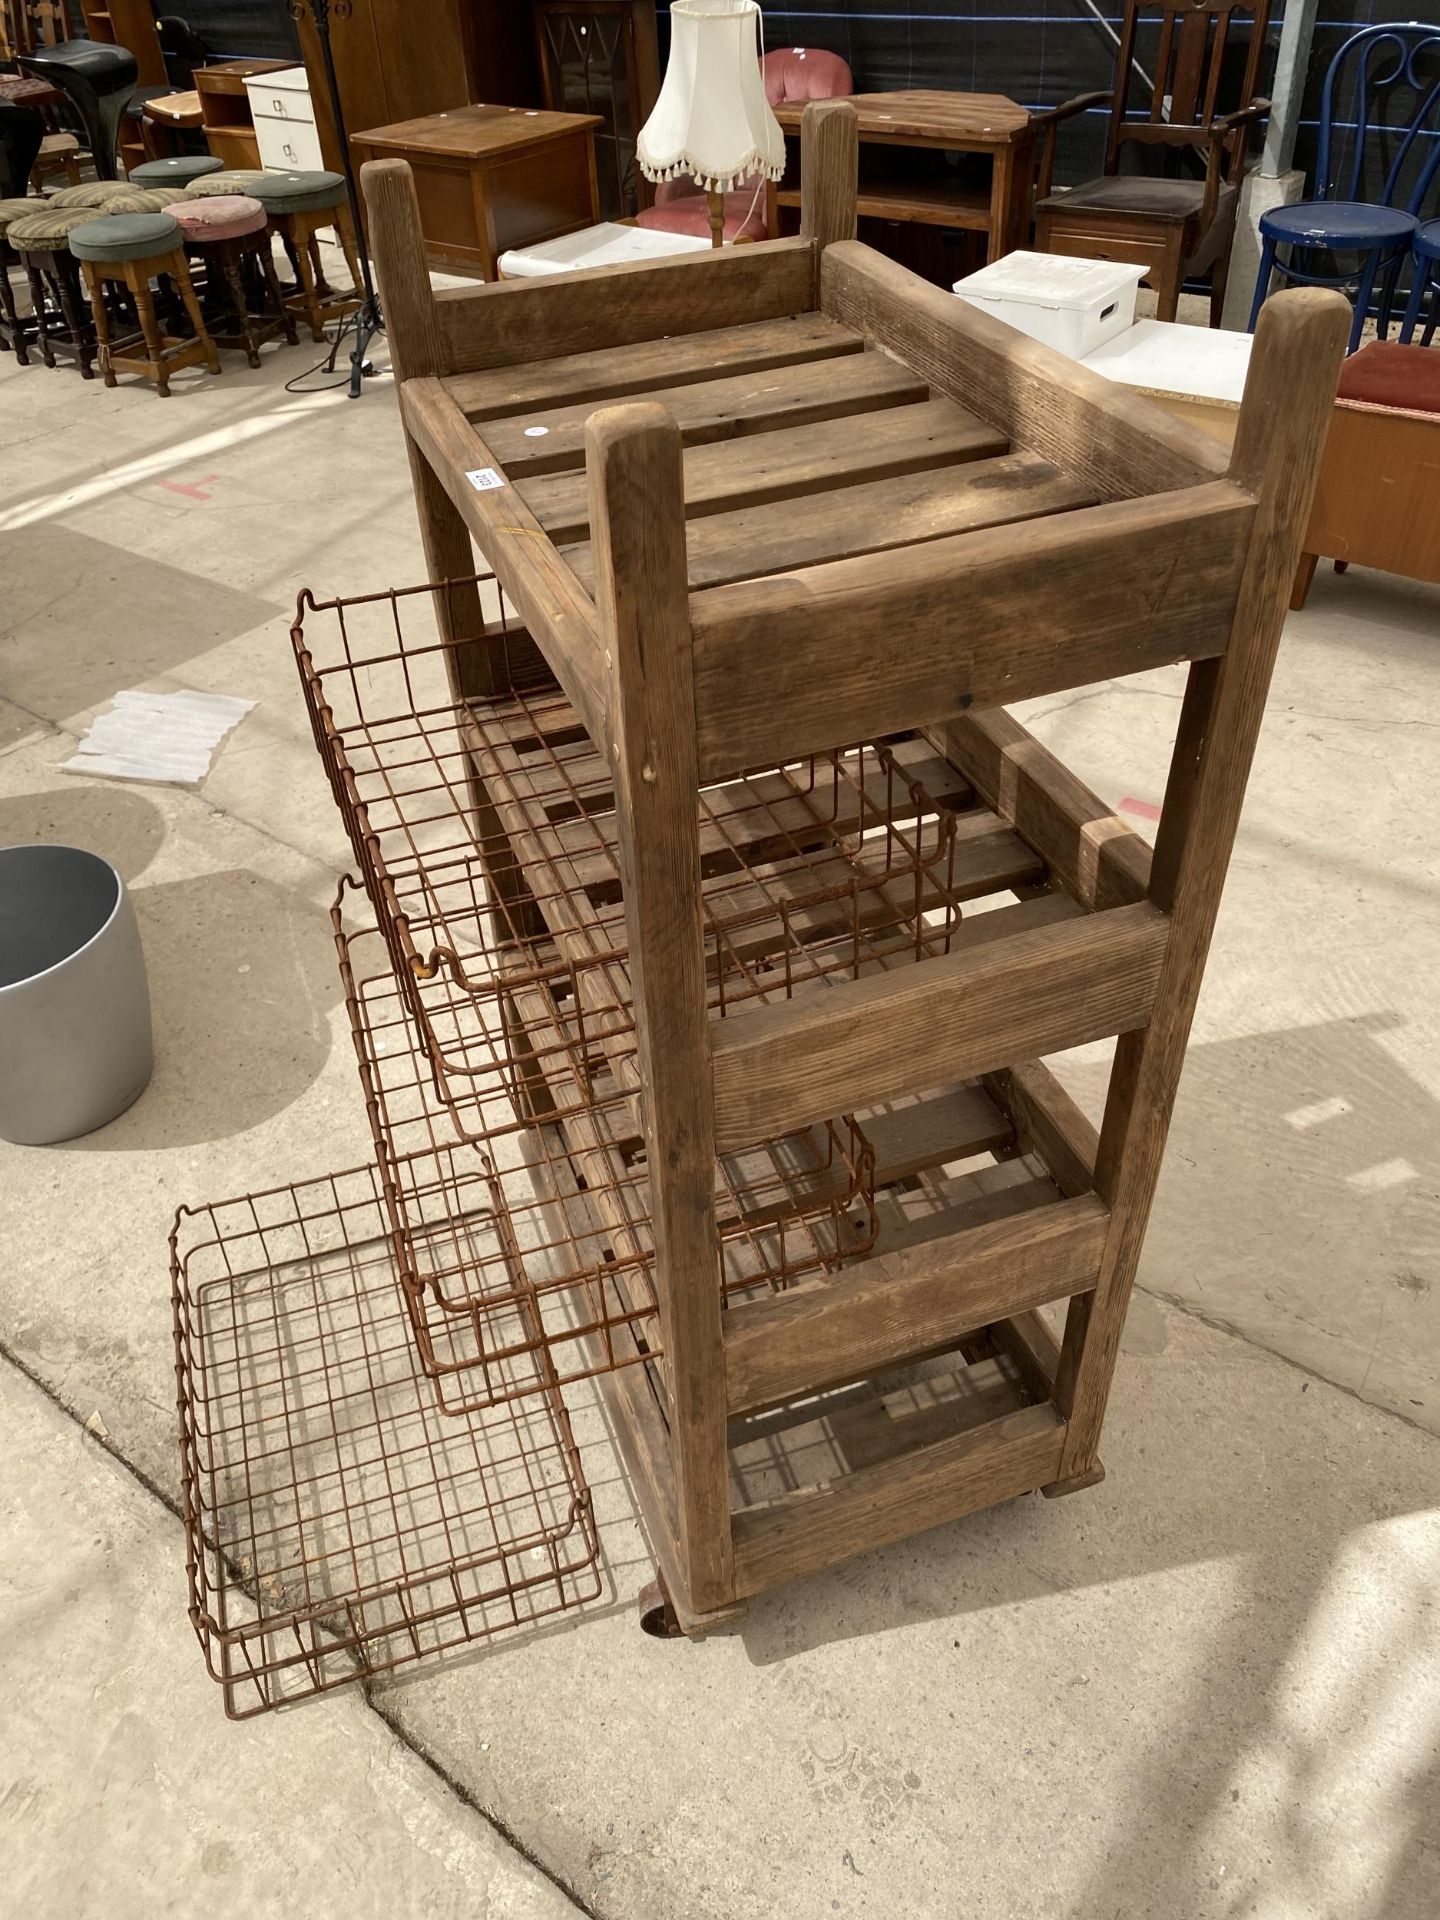 A TALL RUSTIC FOUR TIER WOODEN FOUR WHEELED STAND WITH WIRE BASKET TRAYS - Image 6 of 6